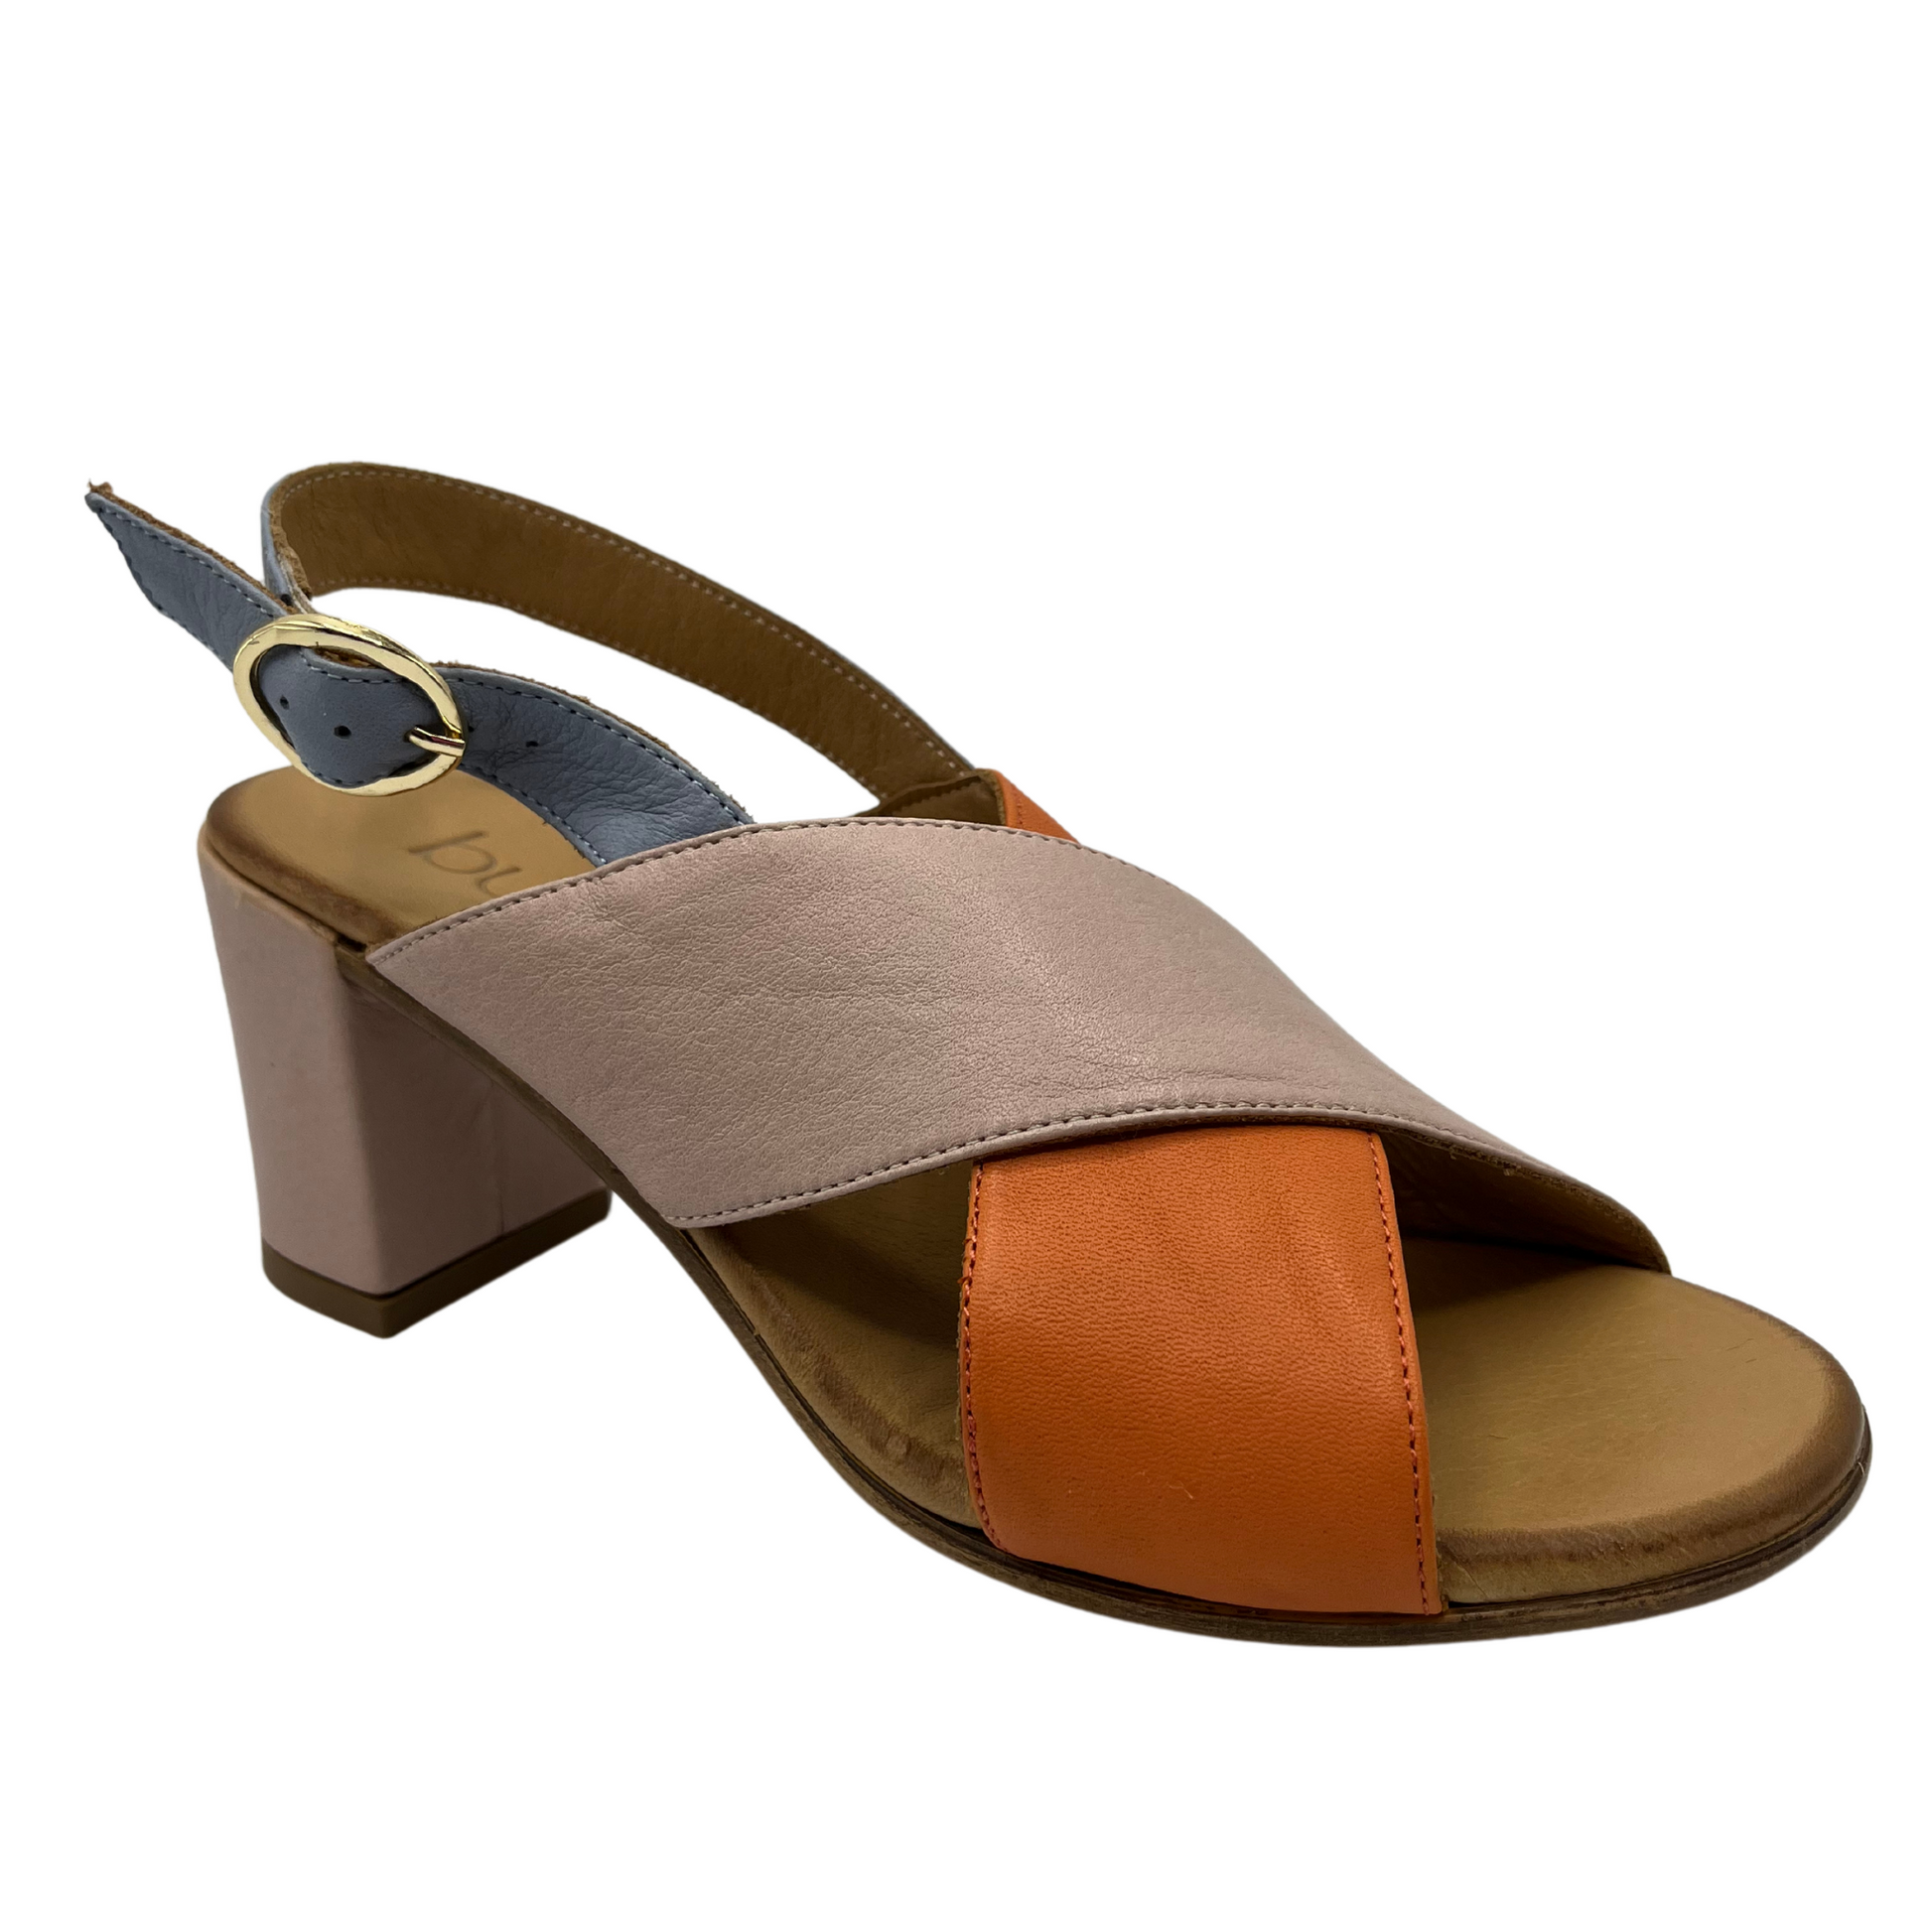 45 degree angled view of leather sandal with orange and pale pink straps. It has a block heel and grey slingback strap